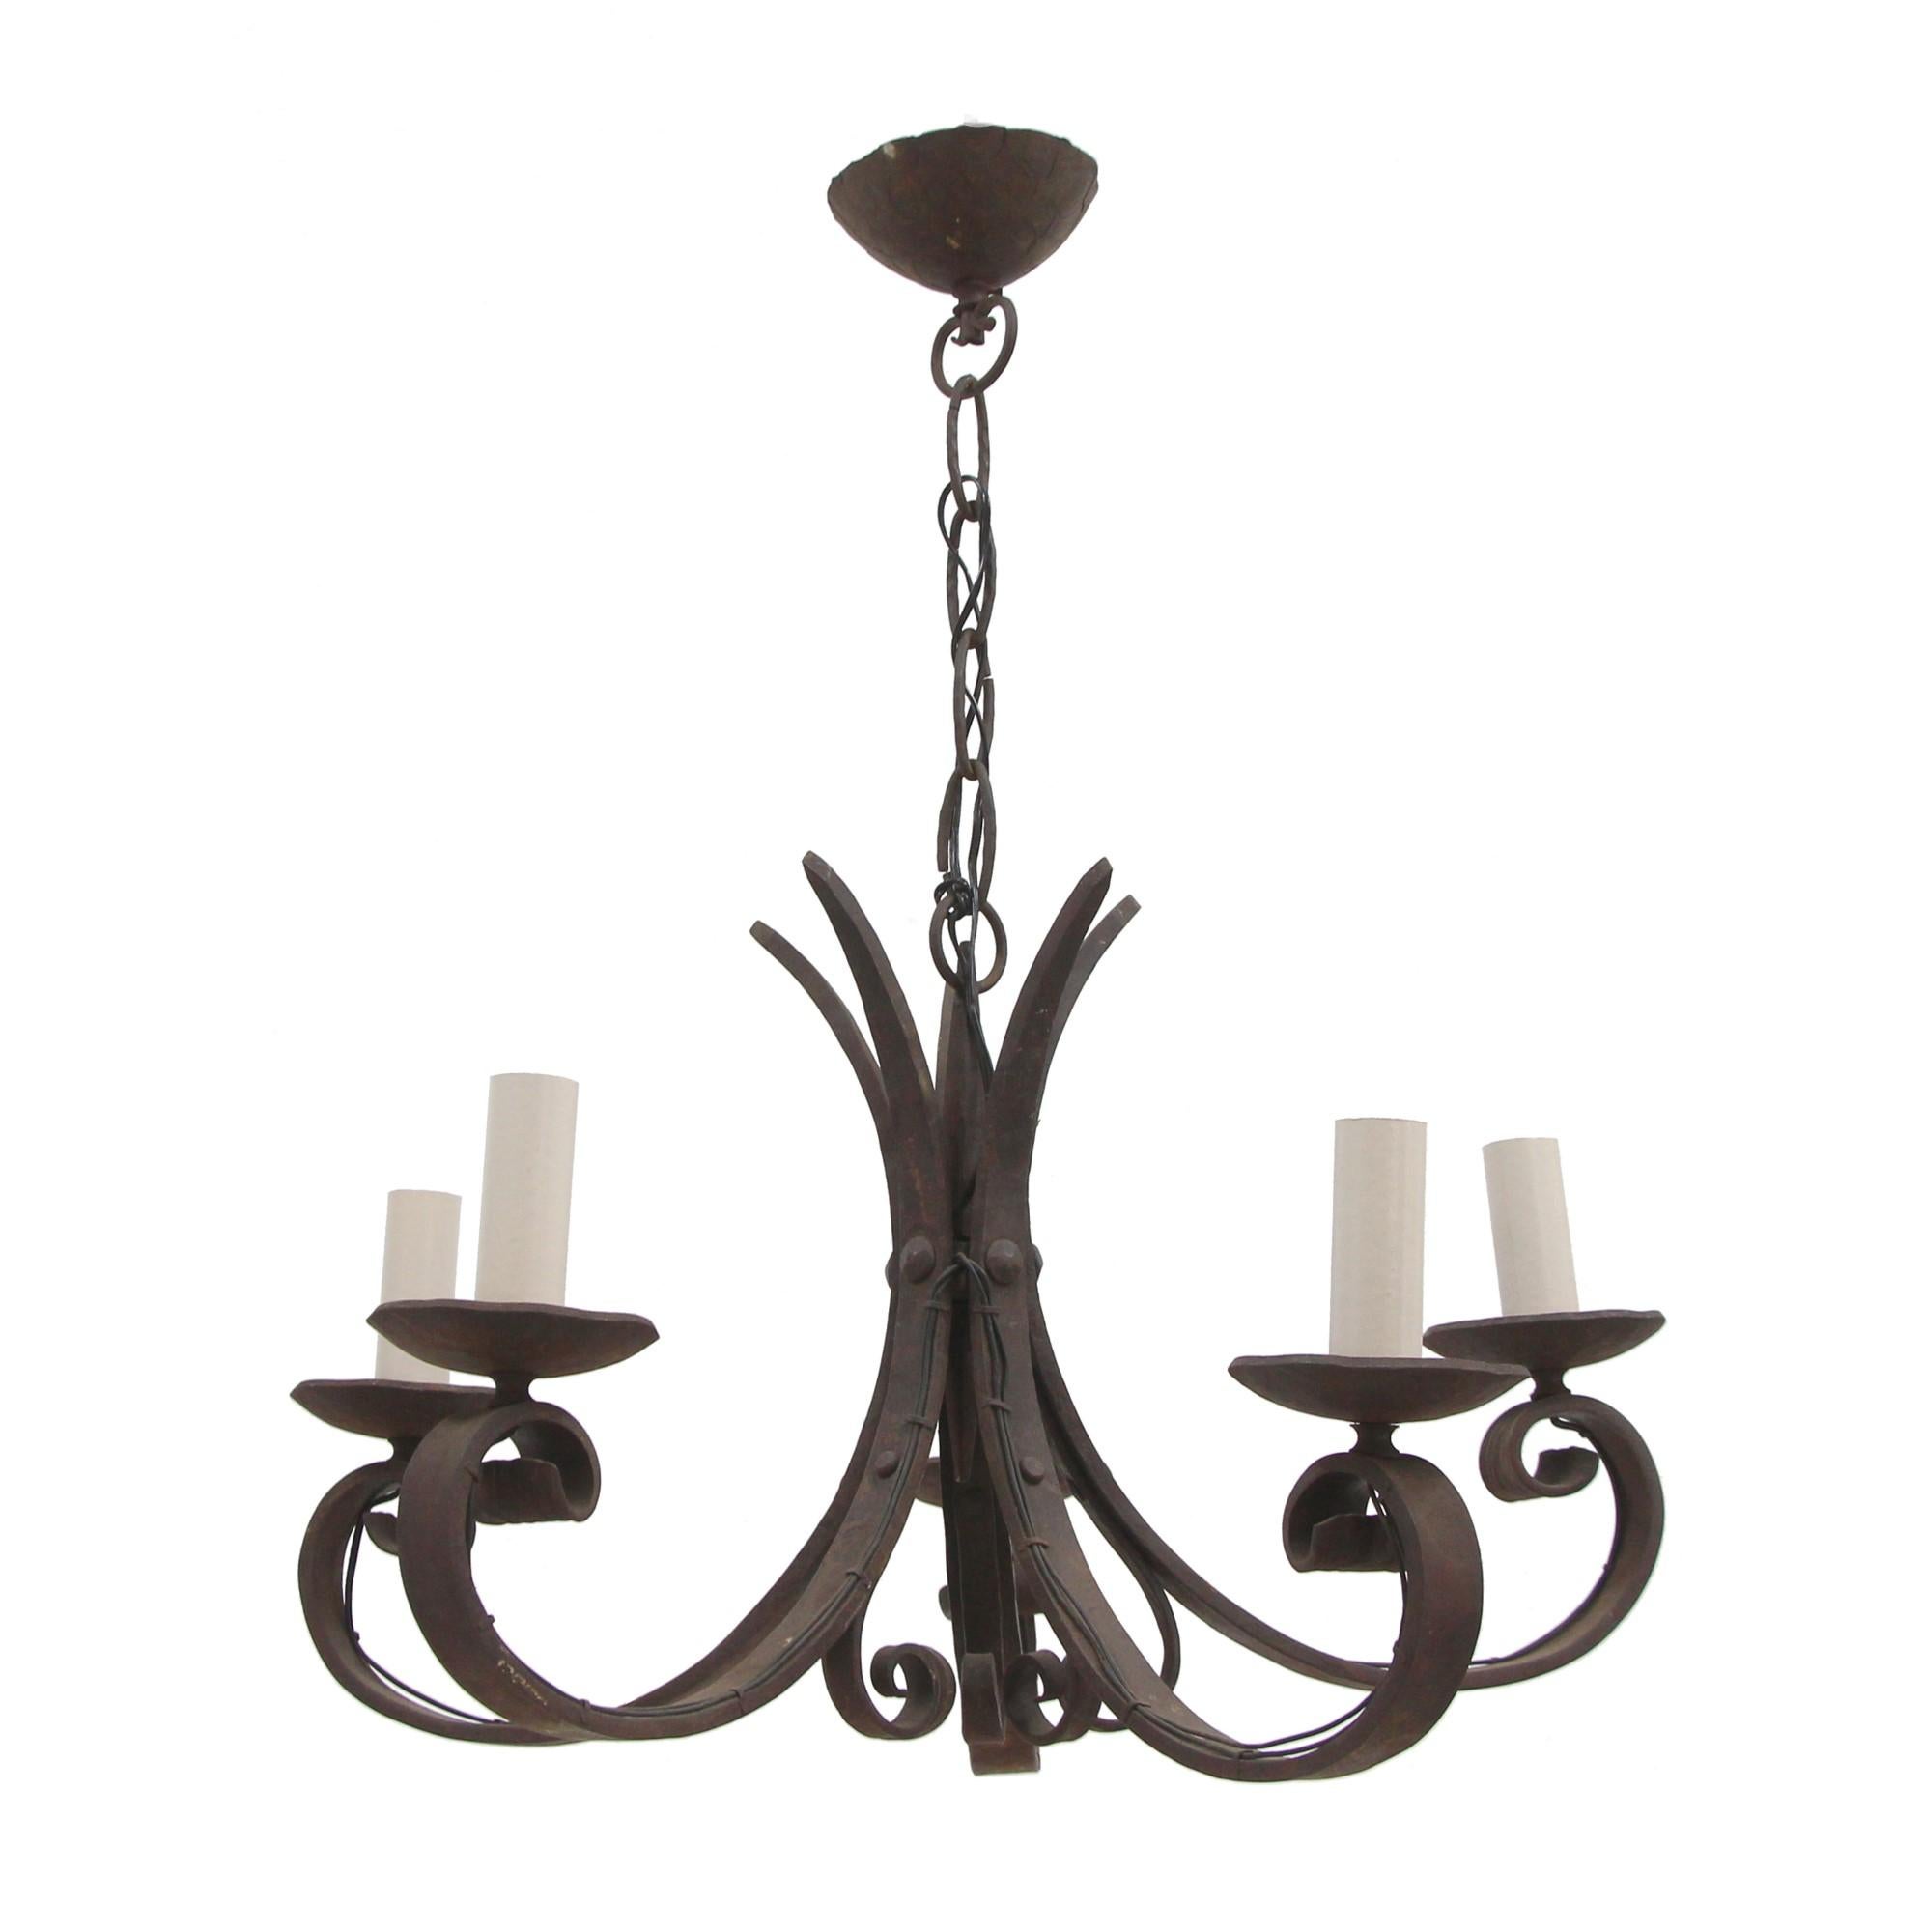 This antique wrought iron chandelier has hand-forged detail and is original to the mid 1900s. It has a country look and is graced with five looped arms. Price includes restoration and rewiring. This can be seen at our 400 Gilligan St location in